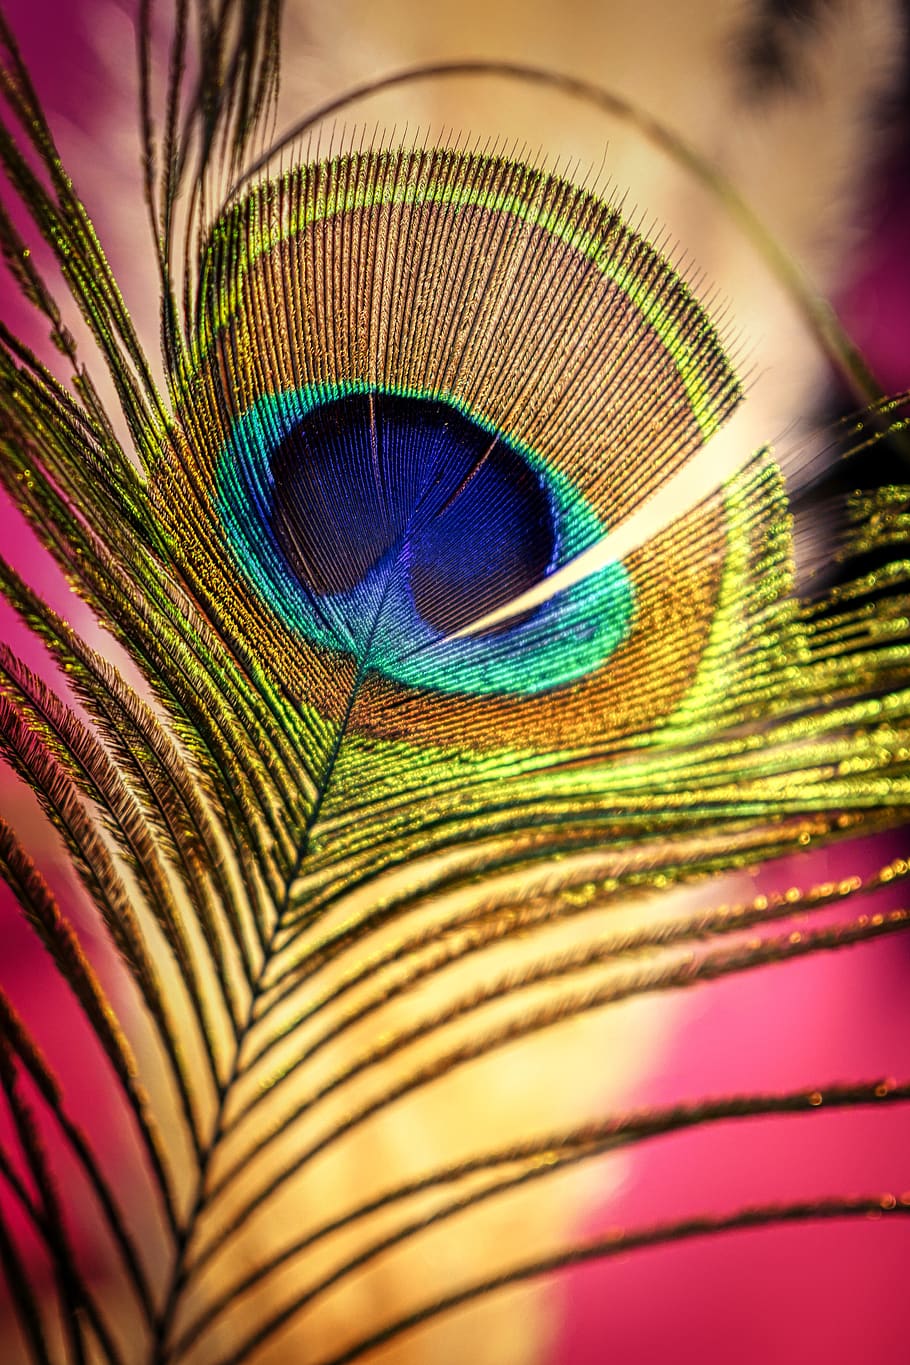 Peacock Feather, Colorful, Iridescent, Plumage, Nature, - Peacock Feather Hd Colorful - HD Wallpaper 